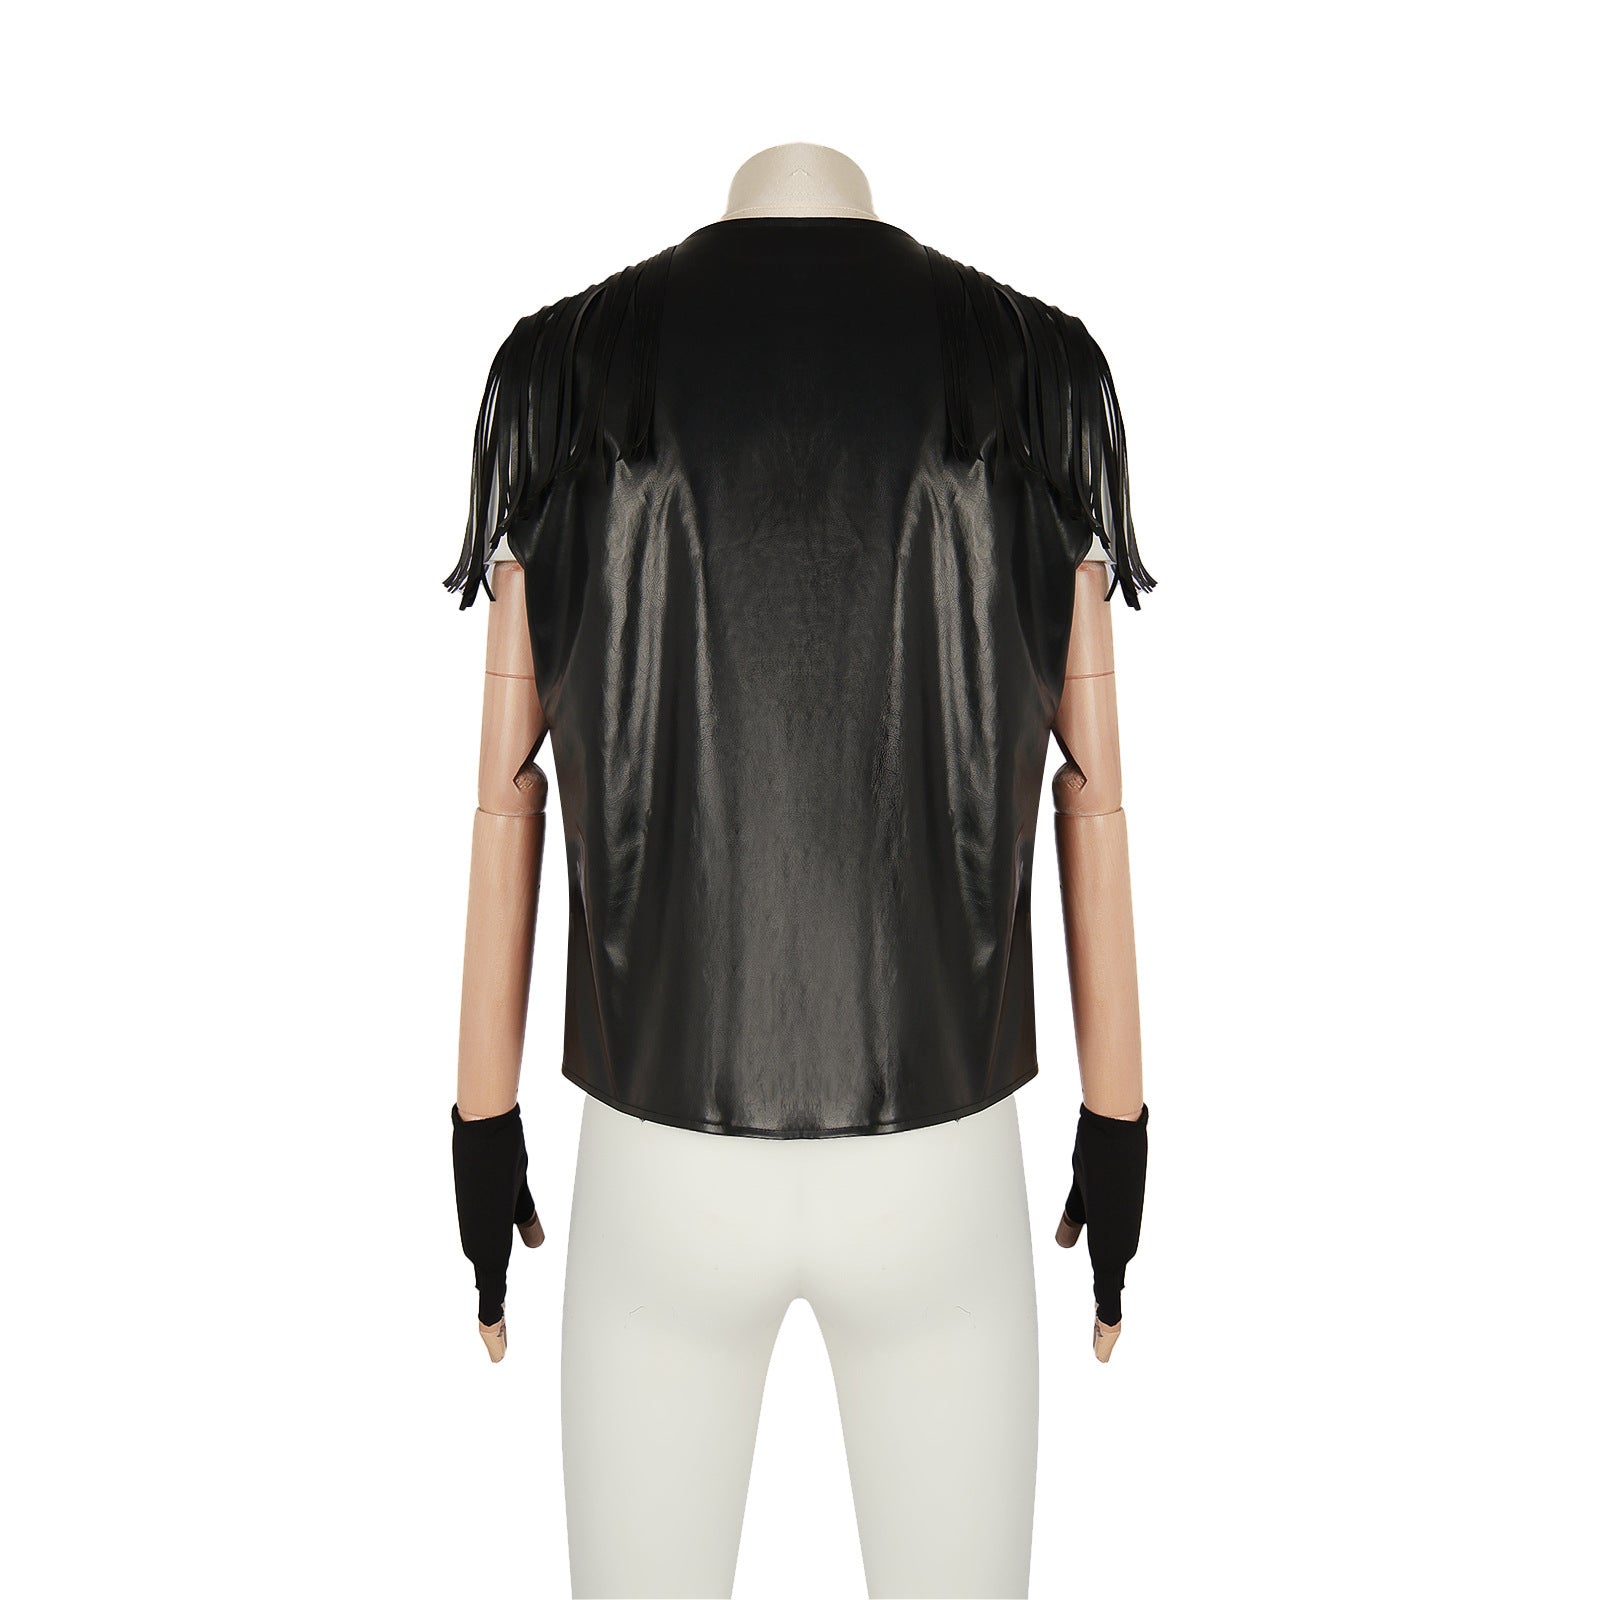 A mannequin wearing a black, sleeveless, leather Maramalive™ European Retro Vest For Men with fringe details on the shoulders and fingerless black gloves exudes Harajuku style. The view is from the back.